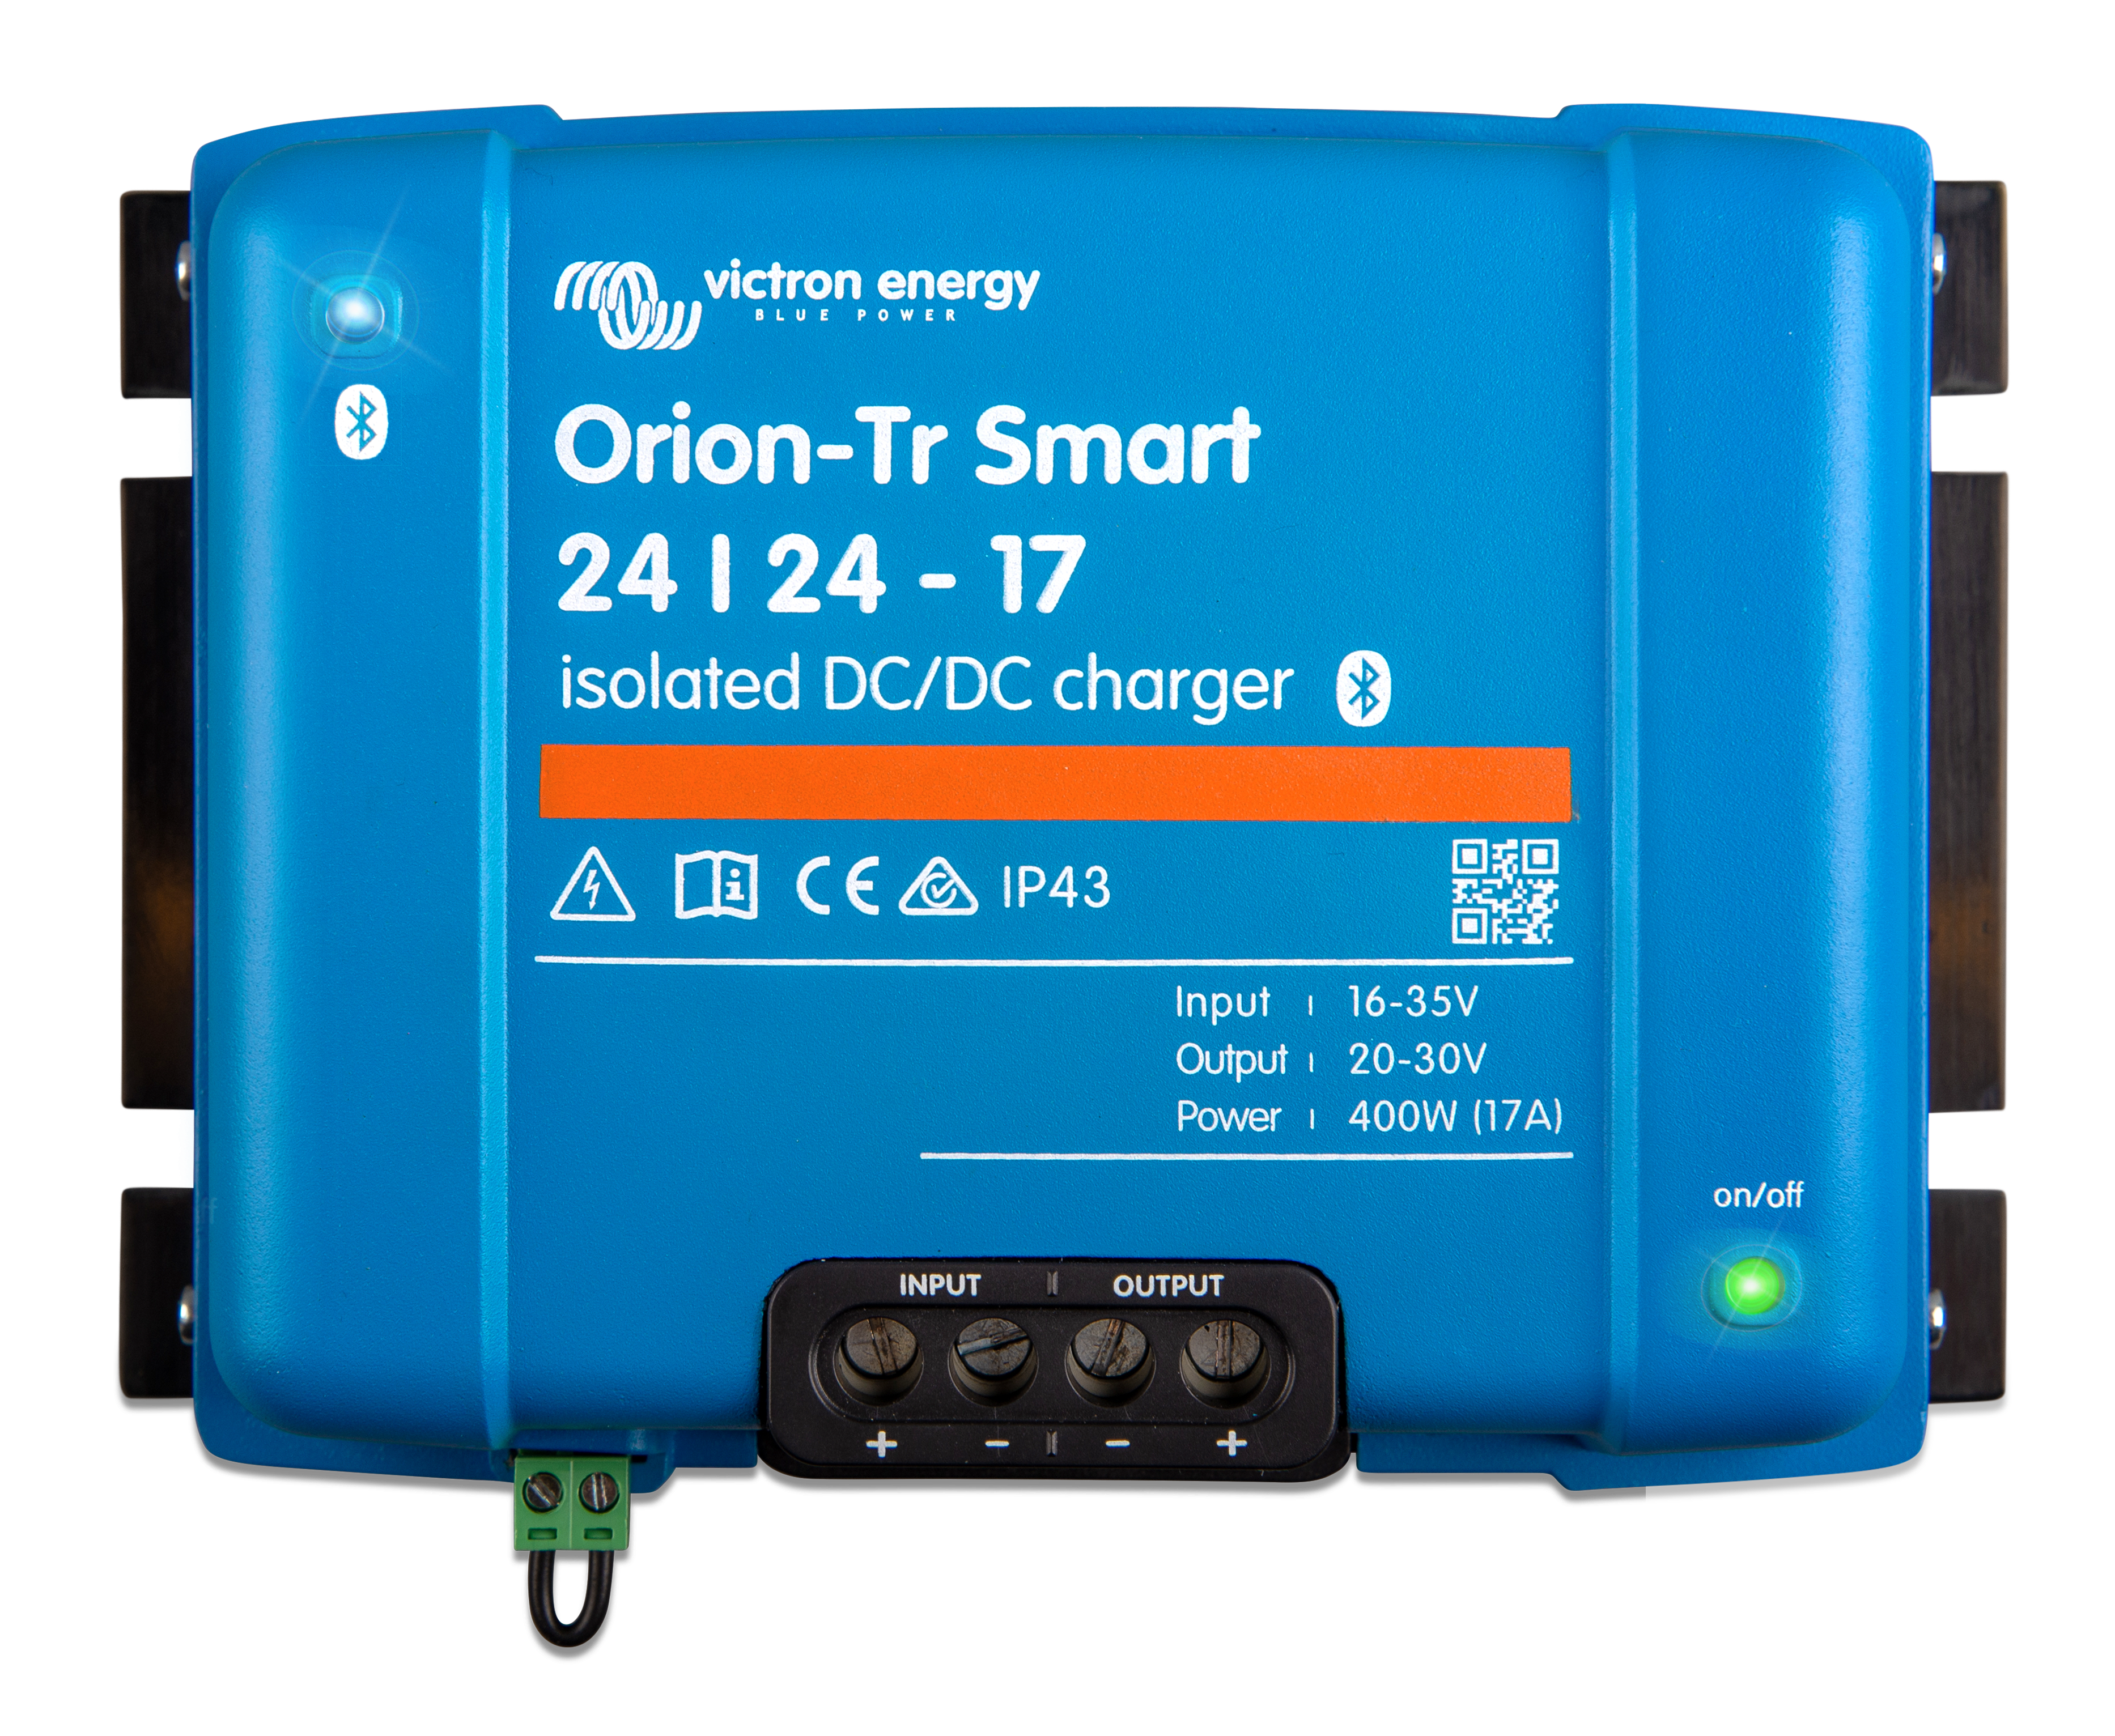 What's the input voltage for the Victron Orion Smart DC DC Charger?